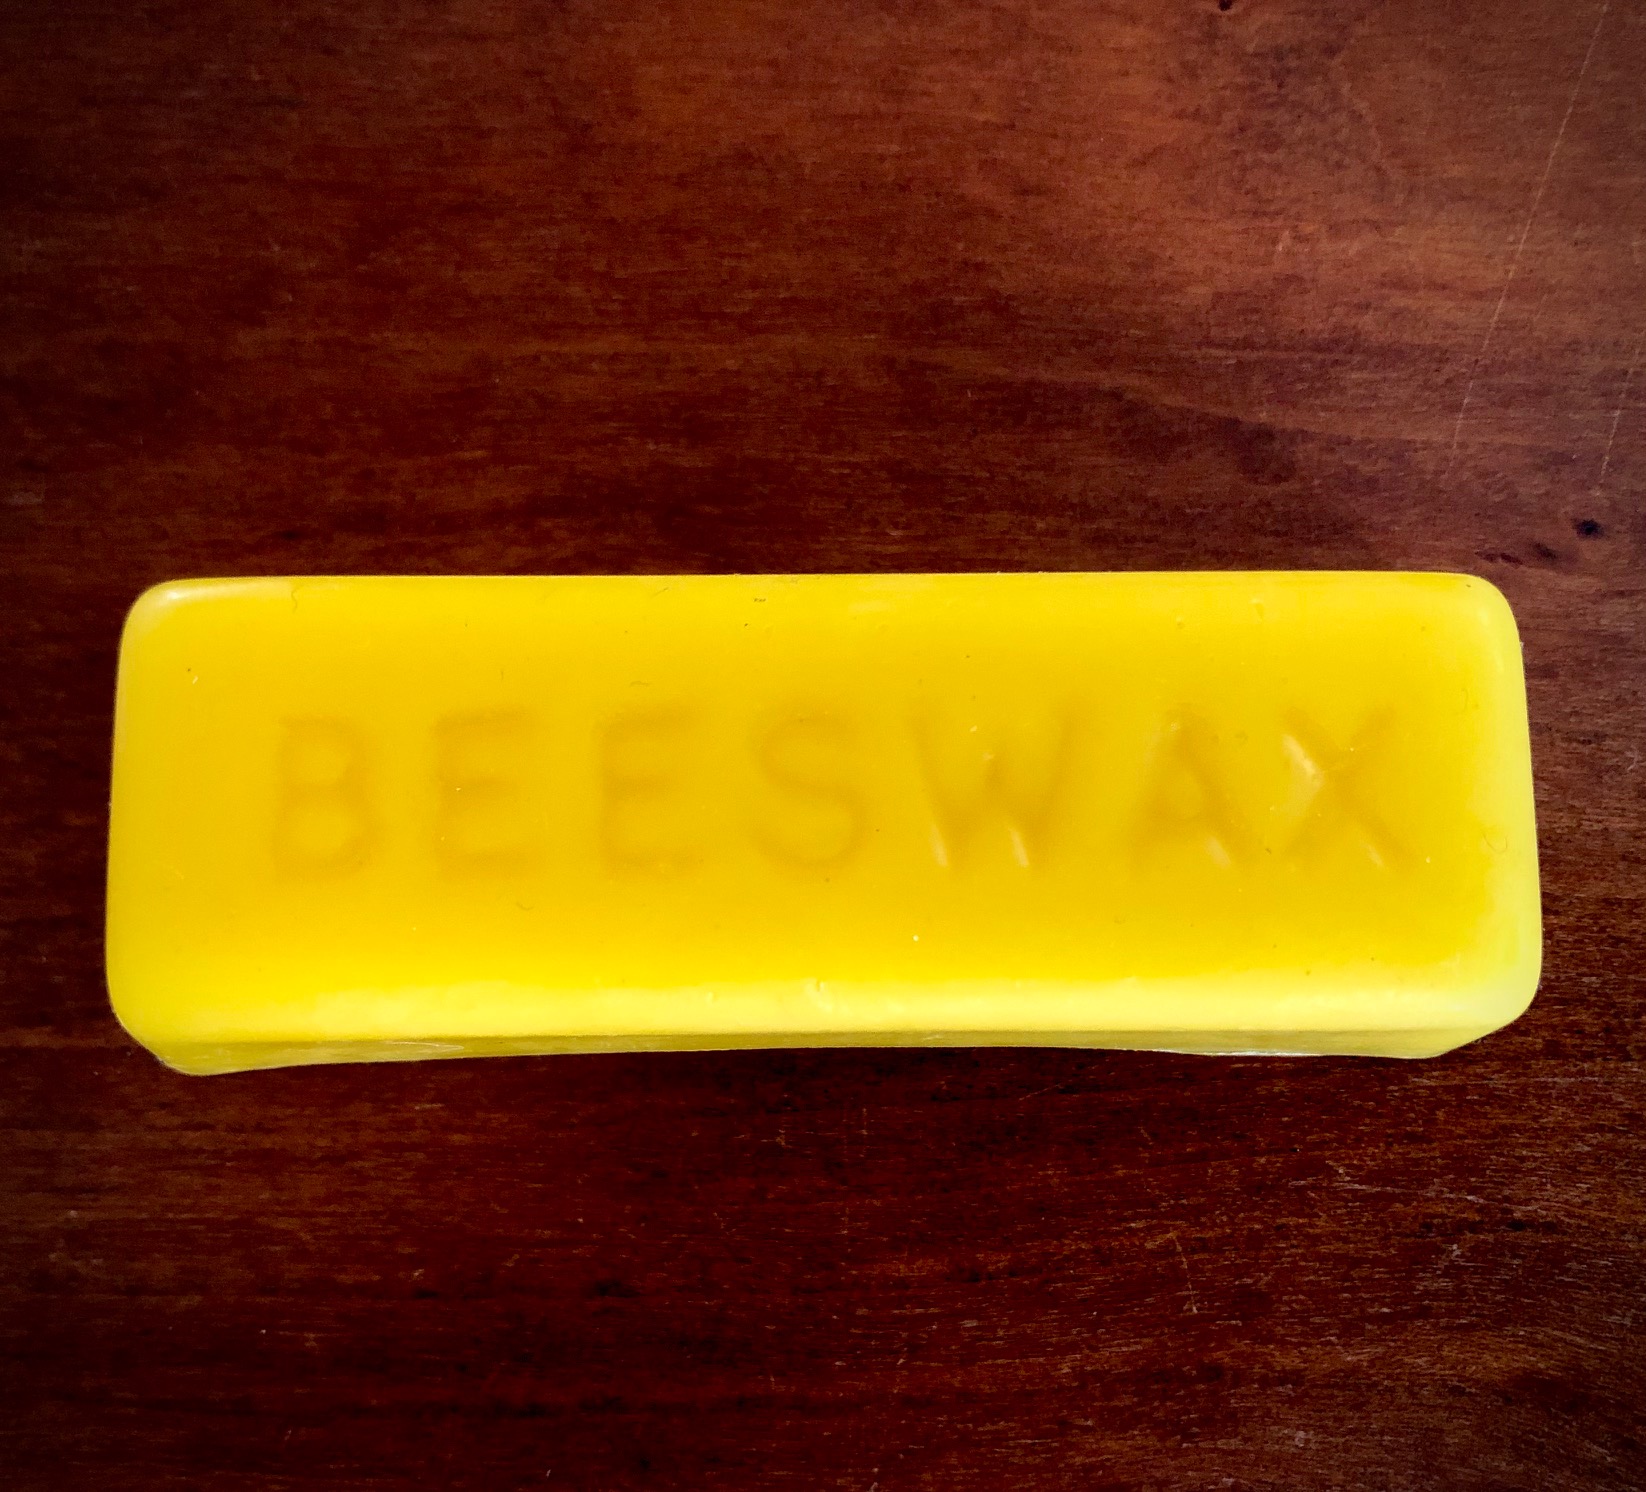 Beeswax Bar, Filtered (100% Pure) 1 oz.